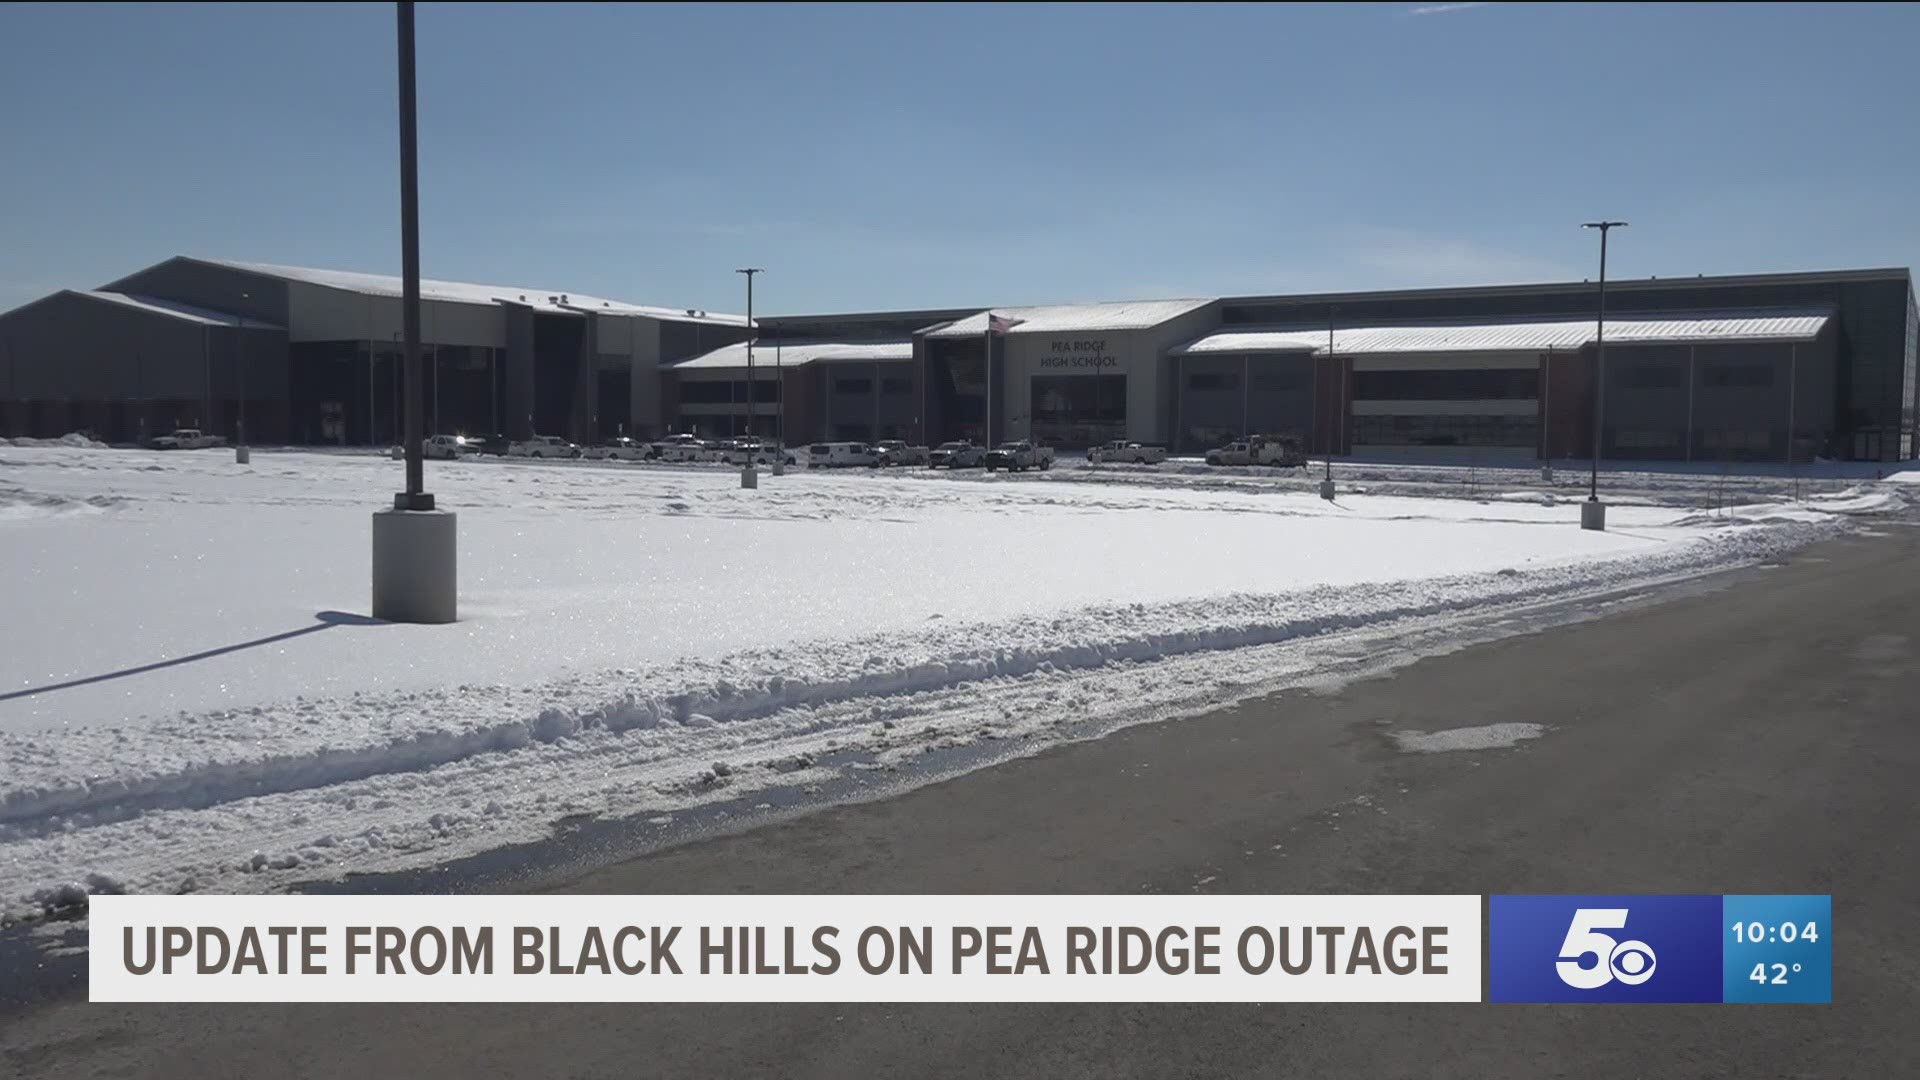 New information was received from the State Utility Commission about why customers of Black Hills Energy in Pea Ridge lost their gas during last week's winter storm.